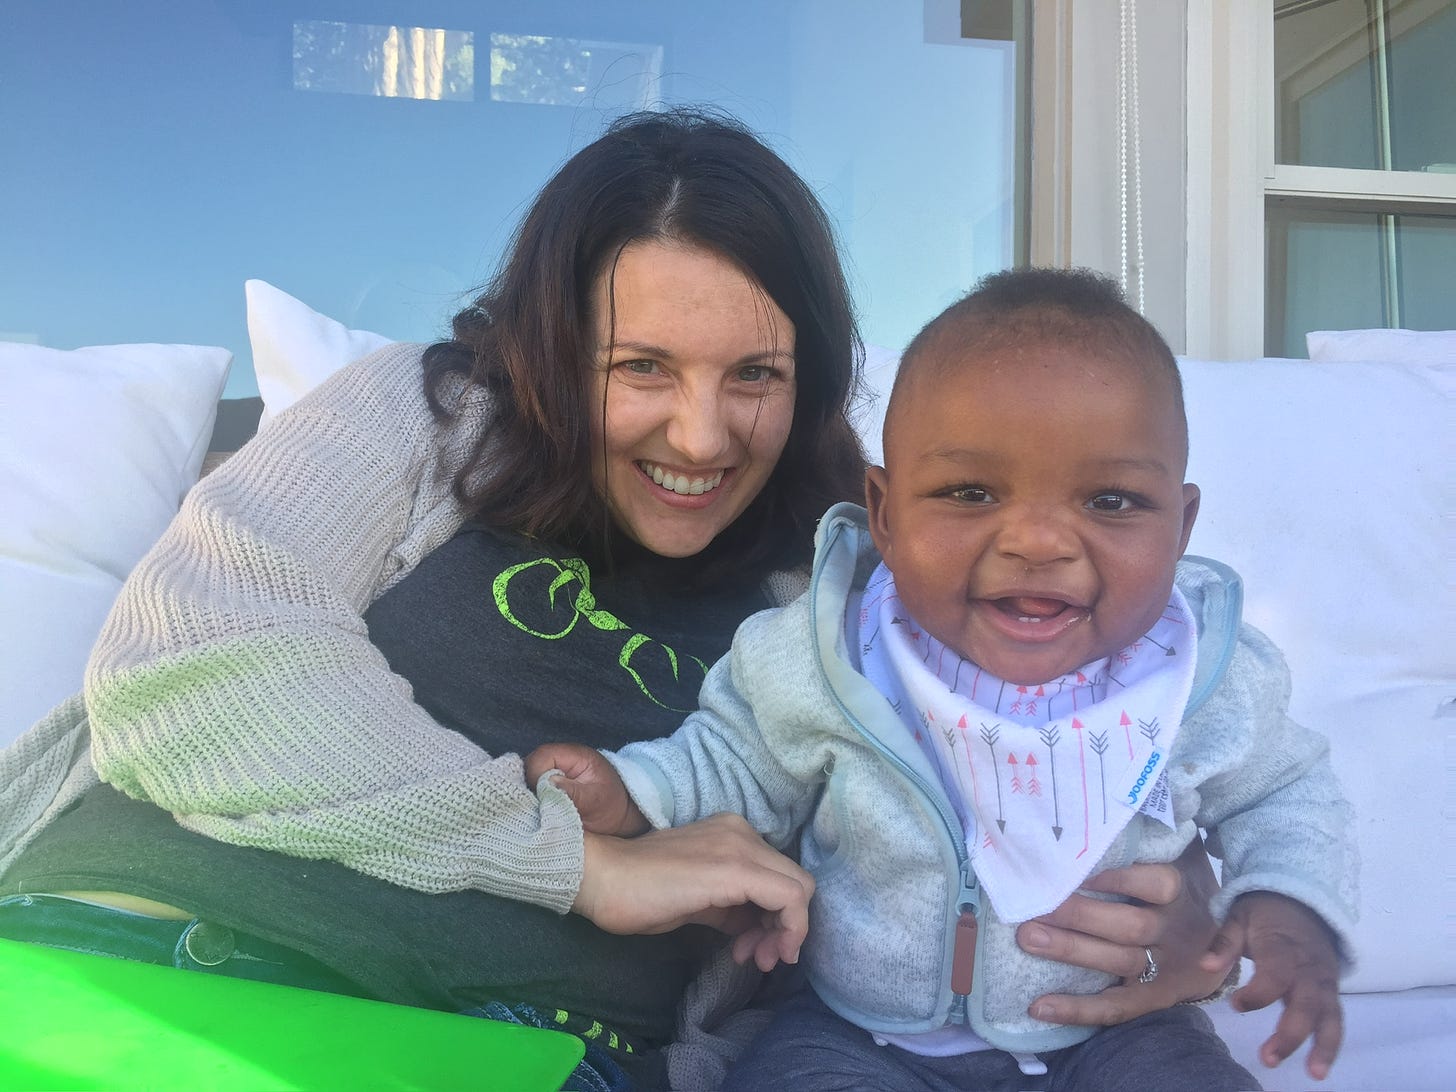 Andrea and Khalil, outside in California. Khalil is 6 months old. Both are smiling. 